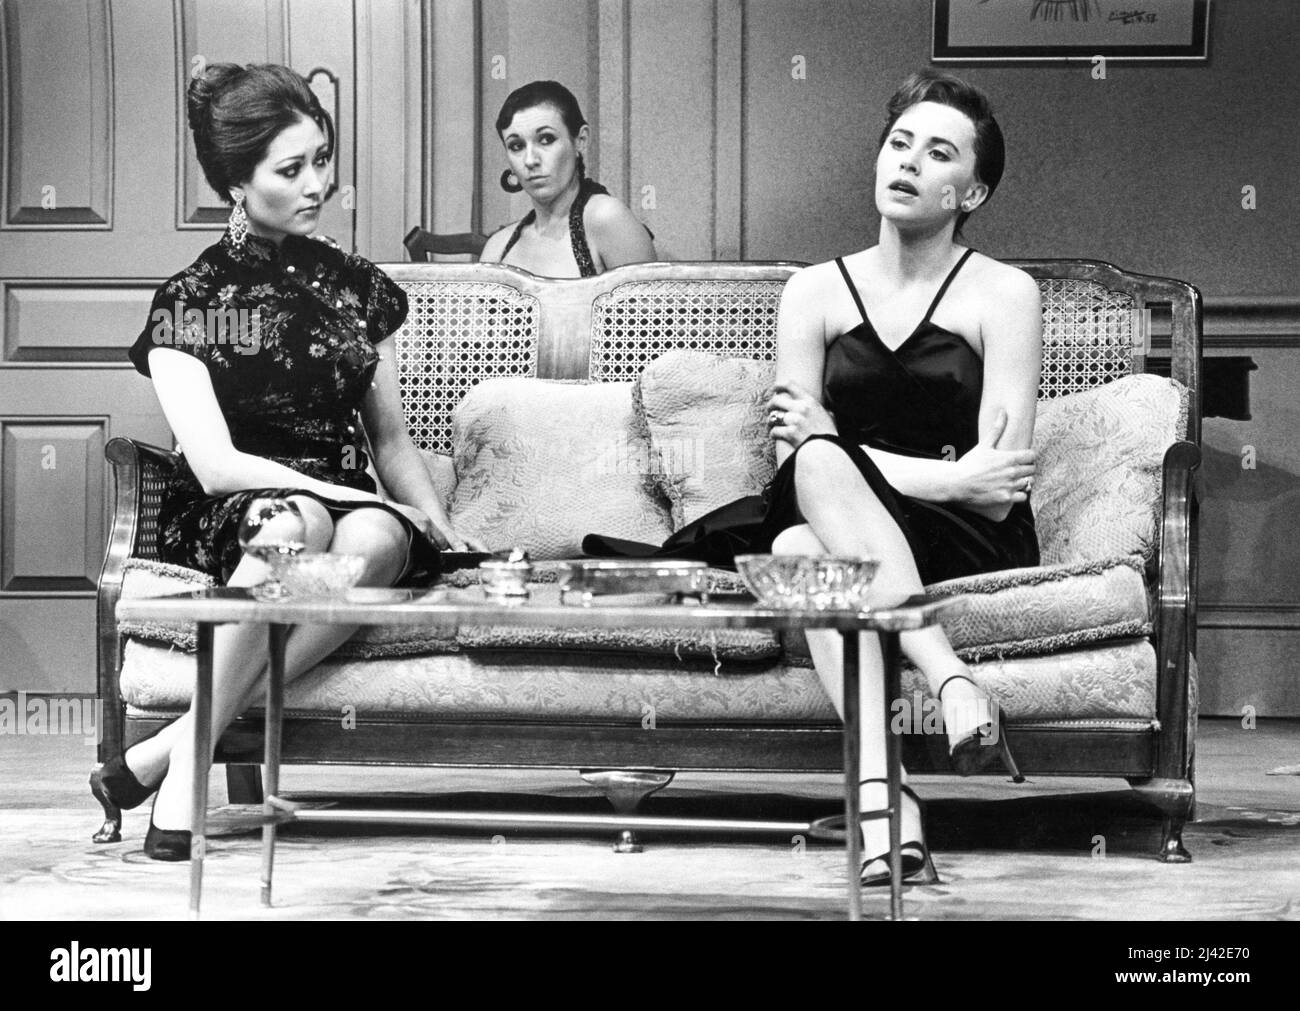 l-r: Me Me Lai (Mrs Aung), Julie Covington (Alice Park), Kate Nelligan (Susan Traherne) in PLENTY written & directed by David Hare at the Lyttelton Theatre,National Theatre (NT), London SE1  12/04/1978  set design: Hayden Griffin   costumes: Deirdre Clancy   lighting: Rory Dempster Stock Photo